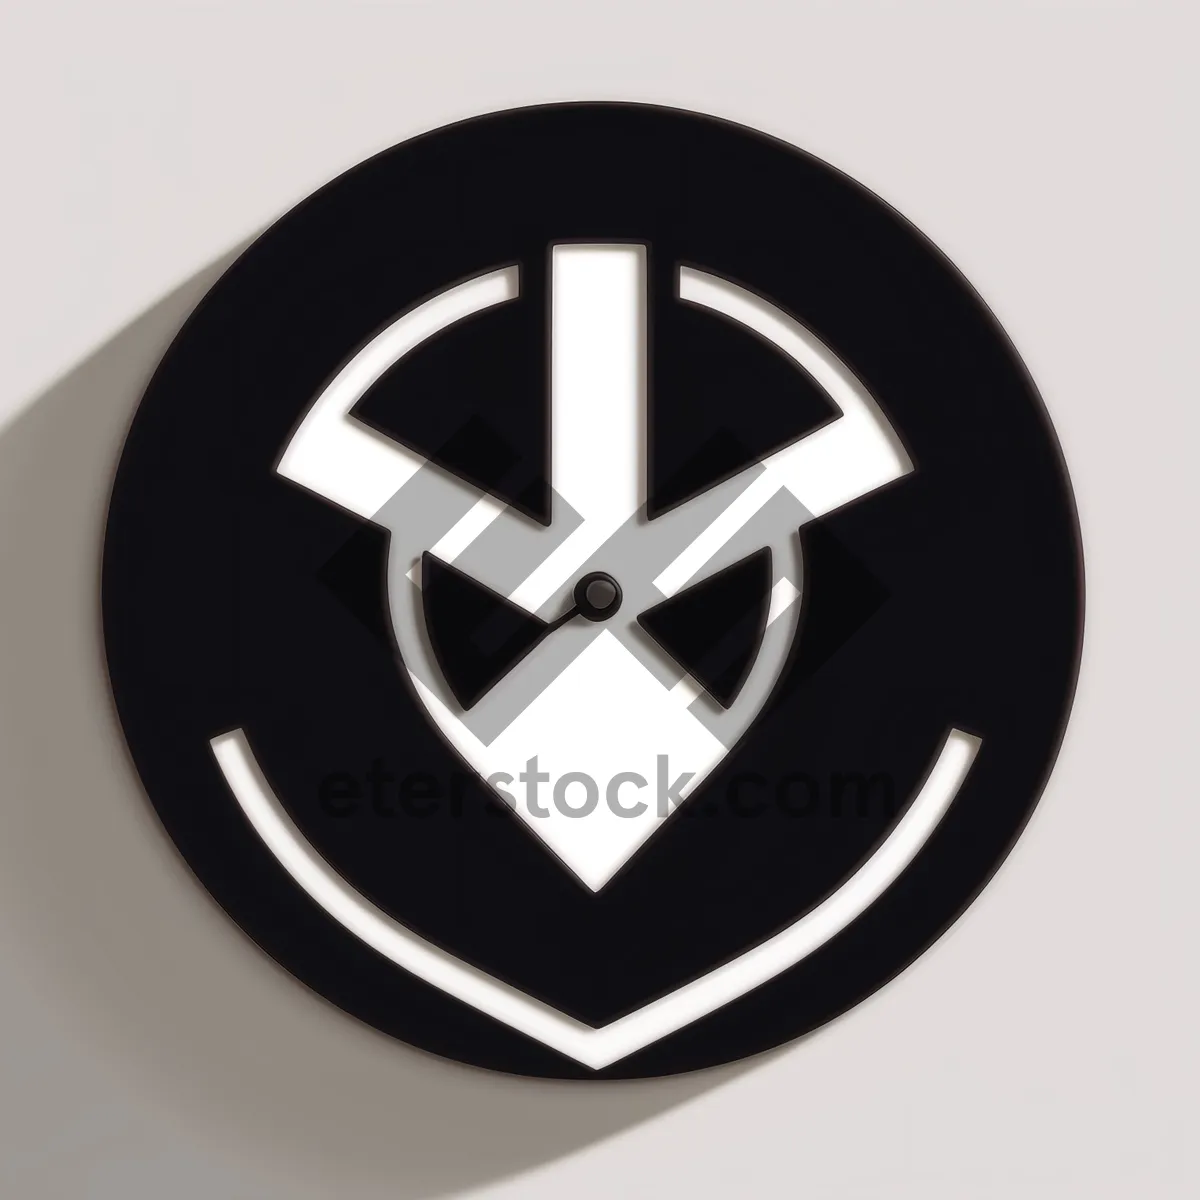 Picture of Shiny Black 3D Danger Sign Button